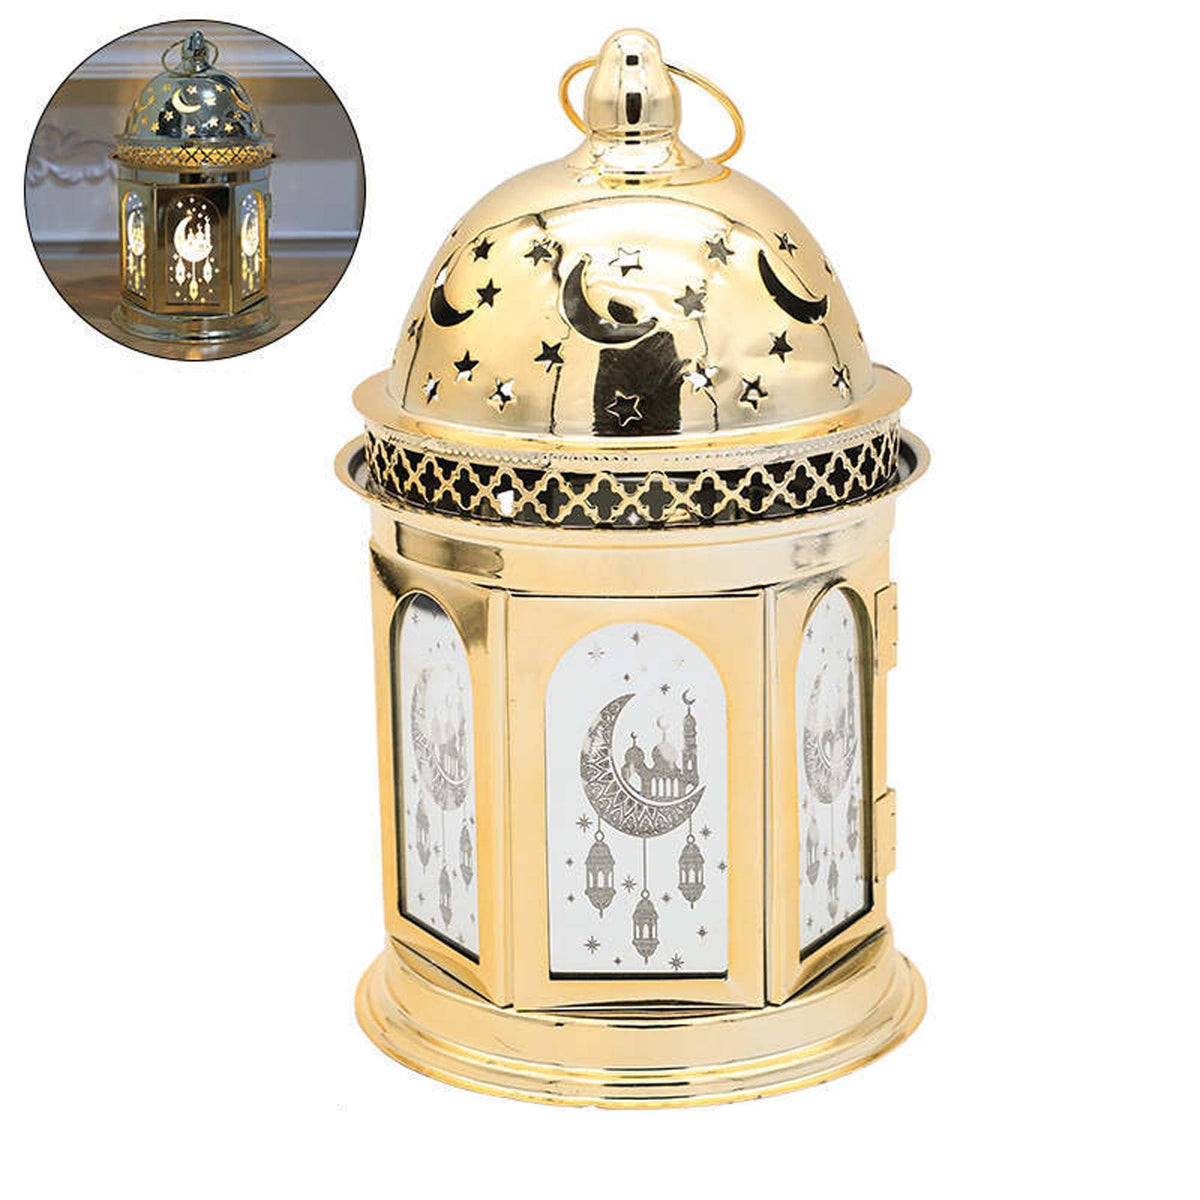 Shaoxing Keqiao Chengyou Textile Co.,Ltd Eid Eid Metal Lantern with LED Candle, 1 Count 810120712123